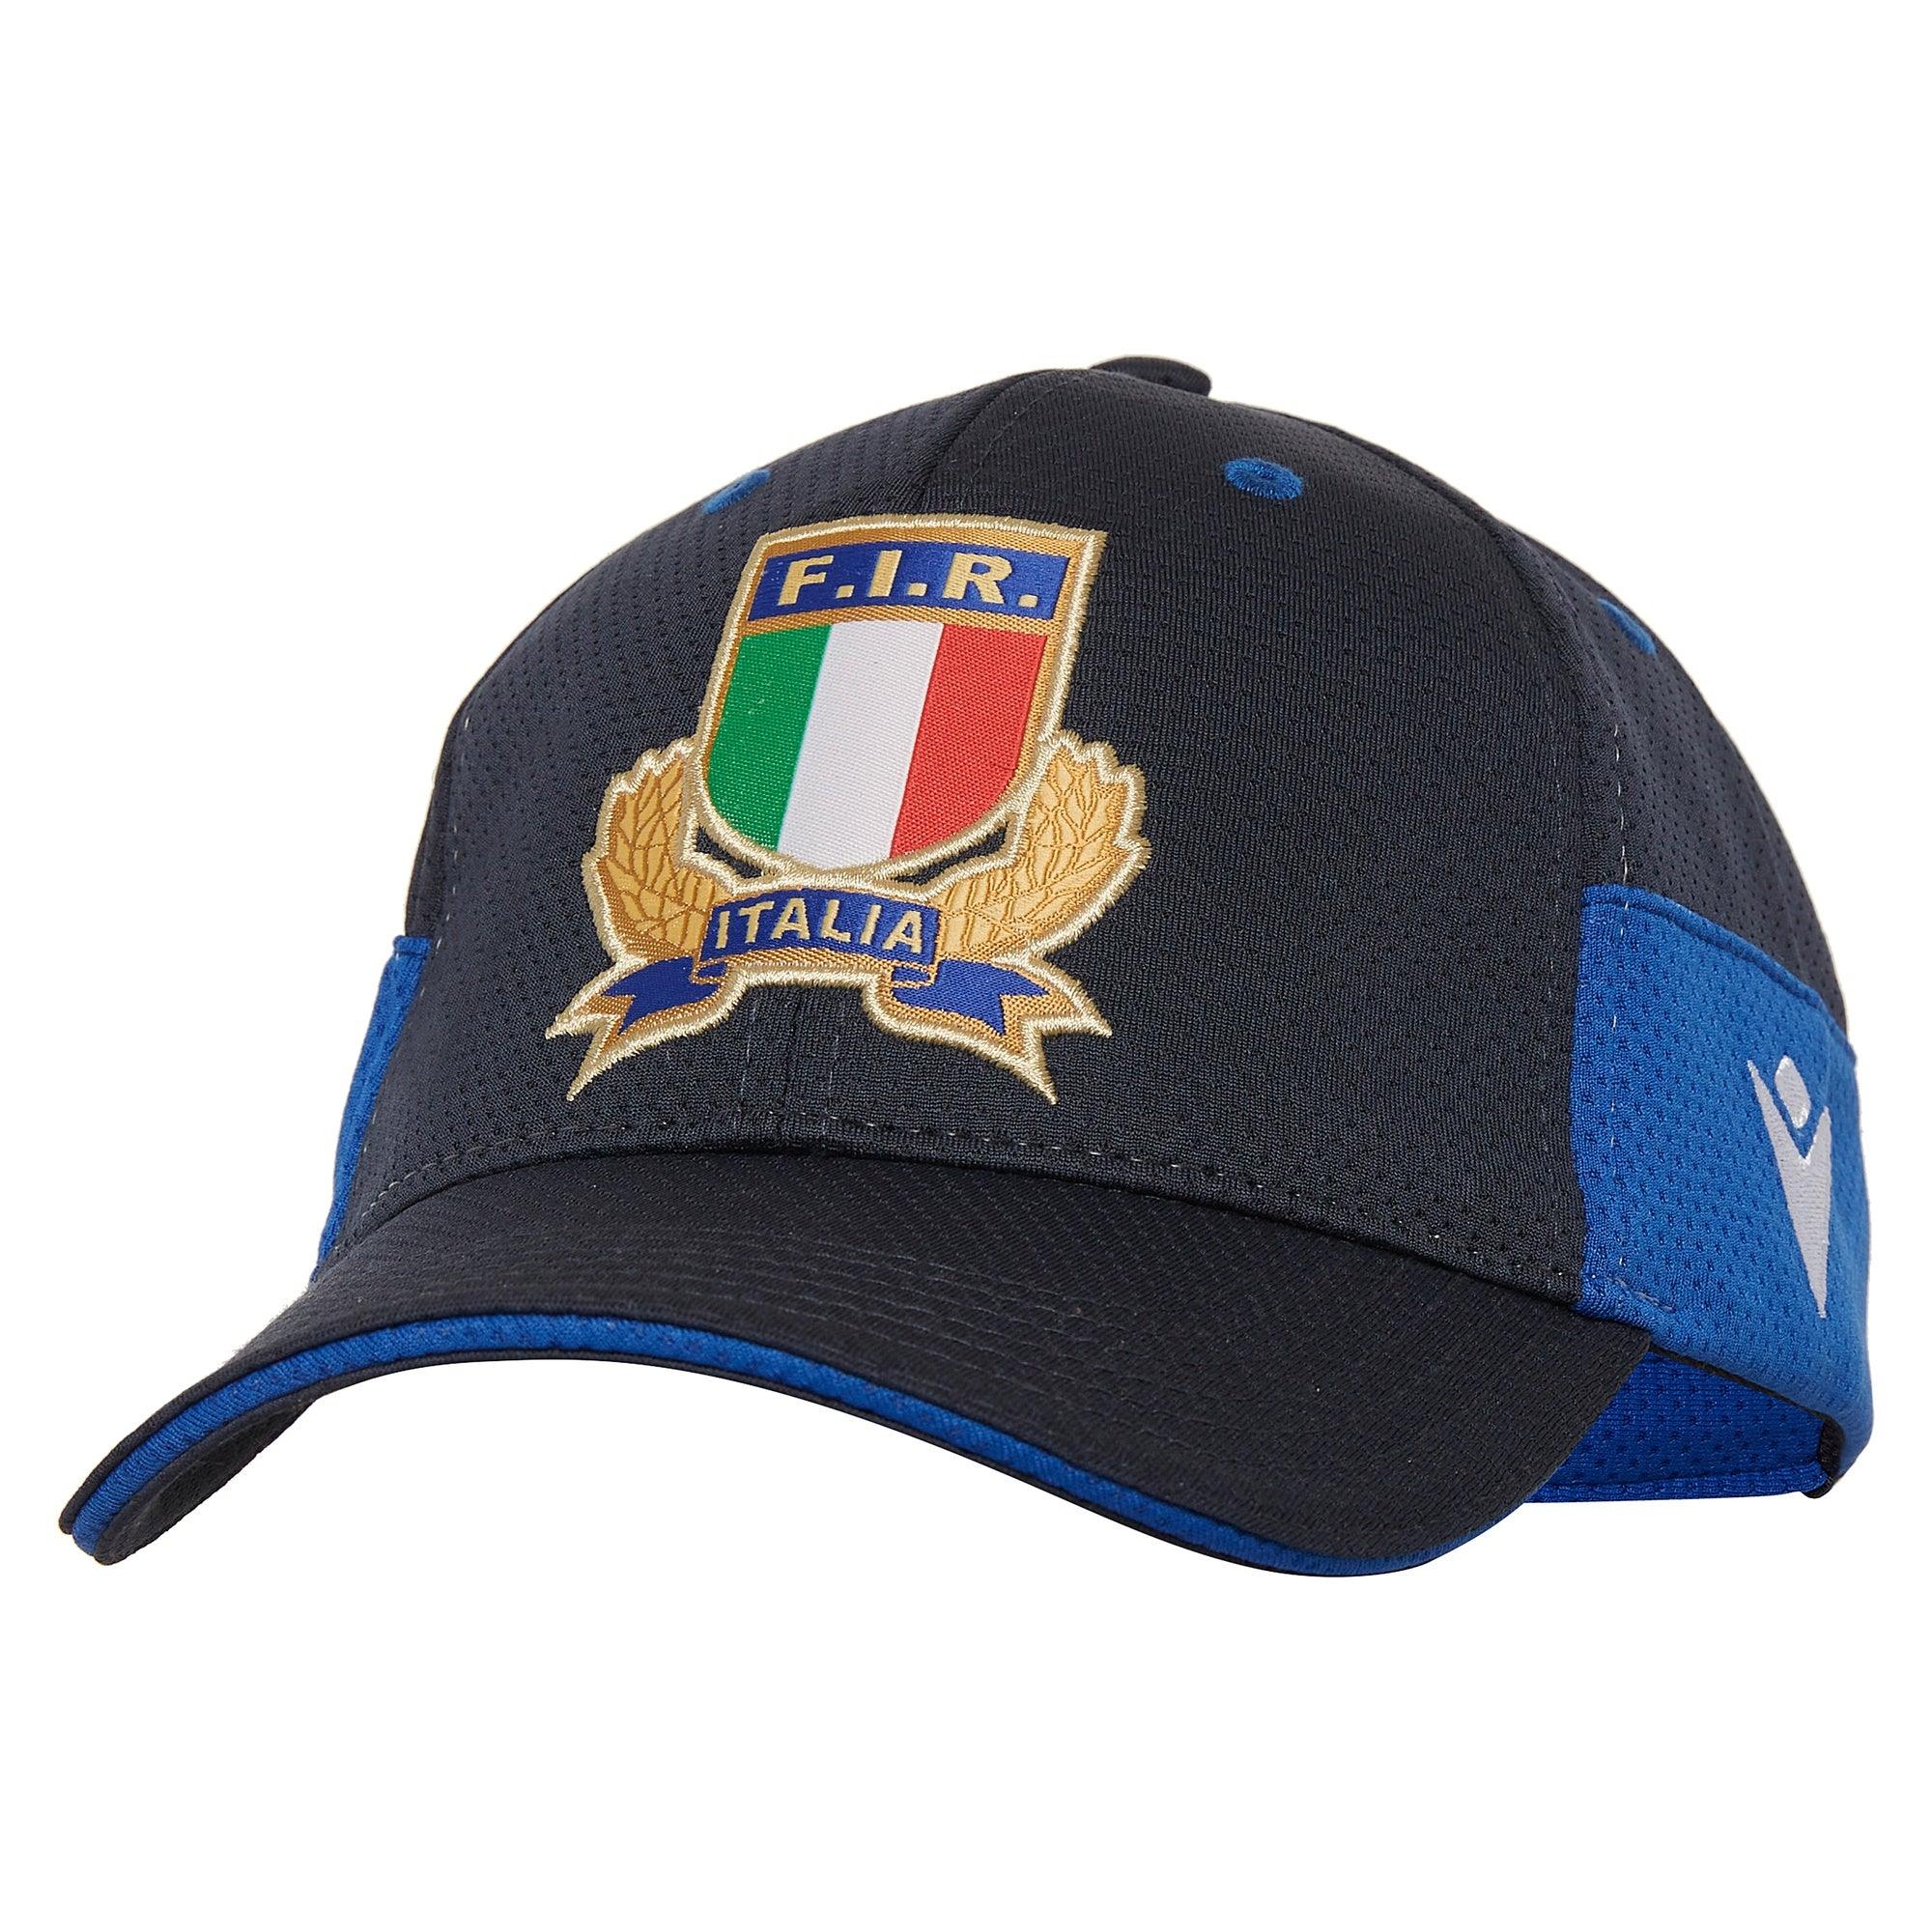 Italy Cap - The Rugby Shop Darwin